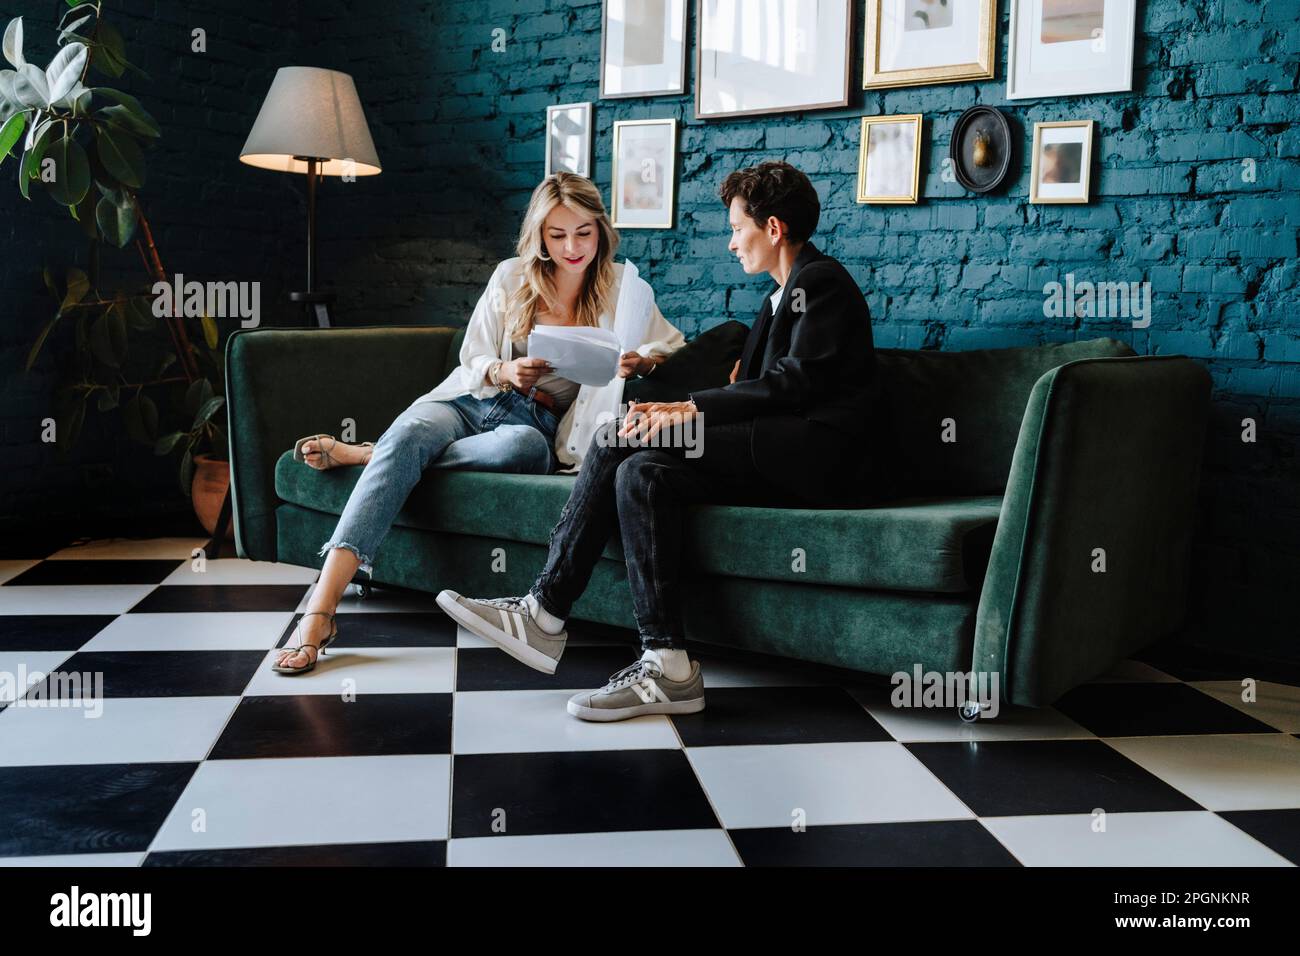 Actress reading script sitting with producer on sofa at film set Stock Photo